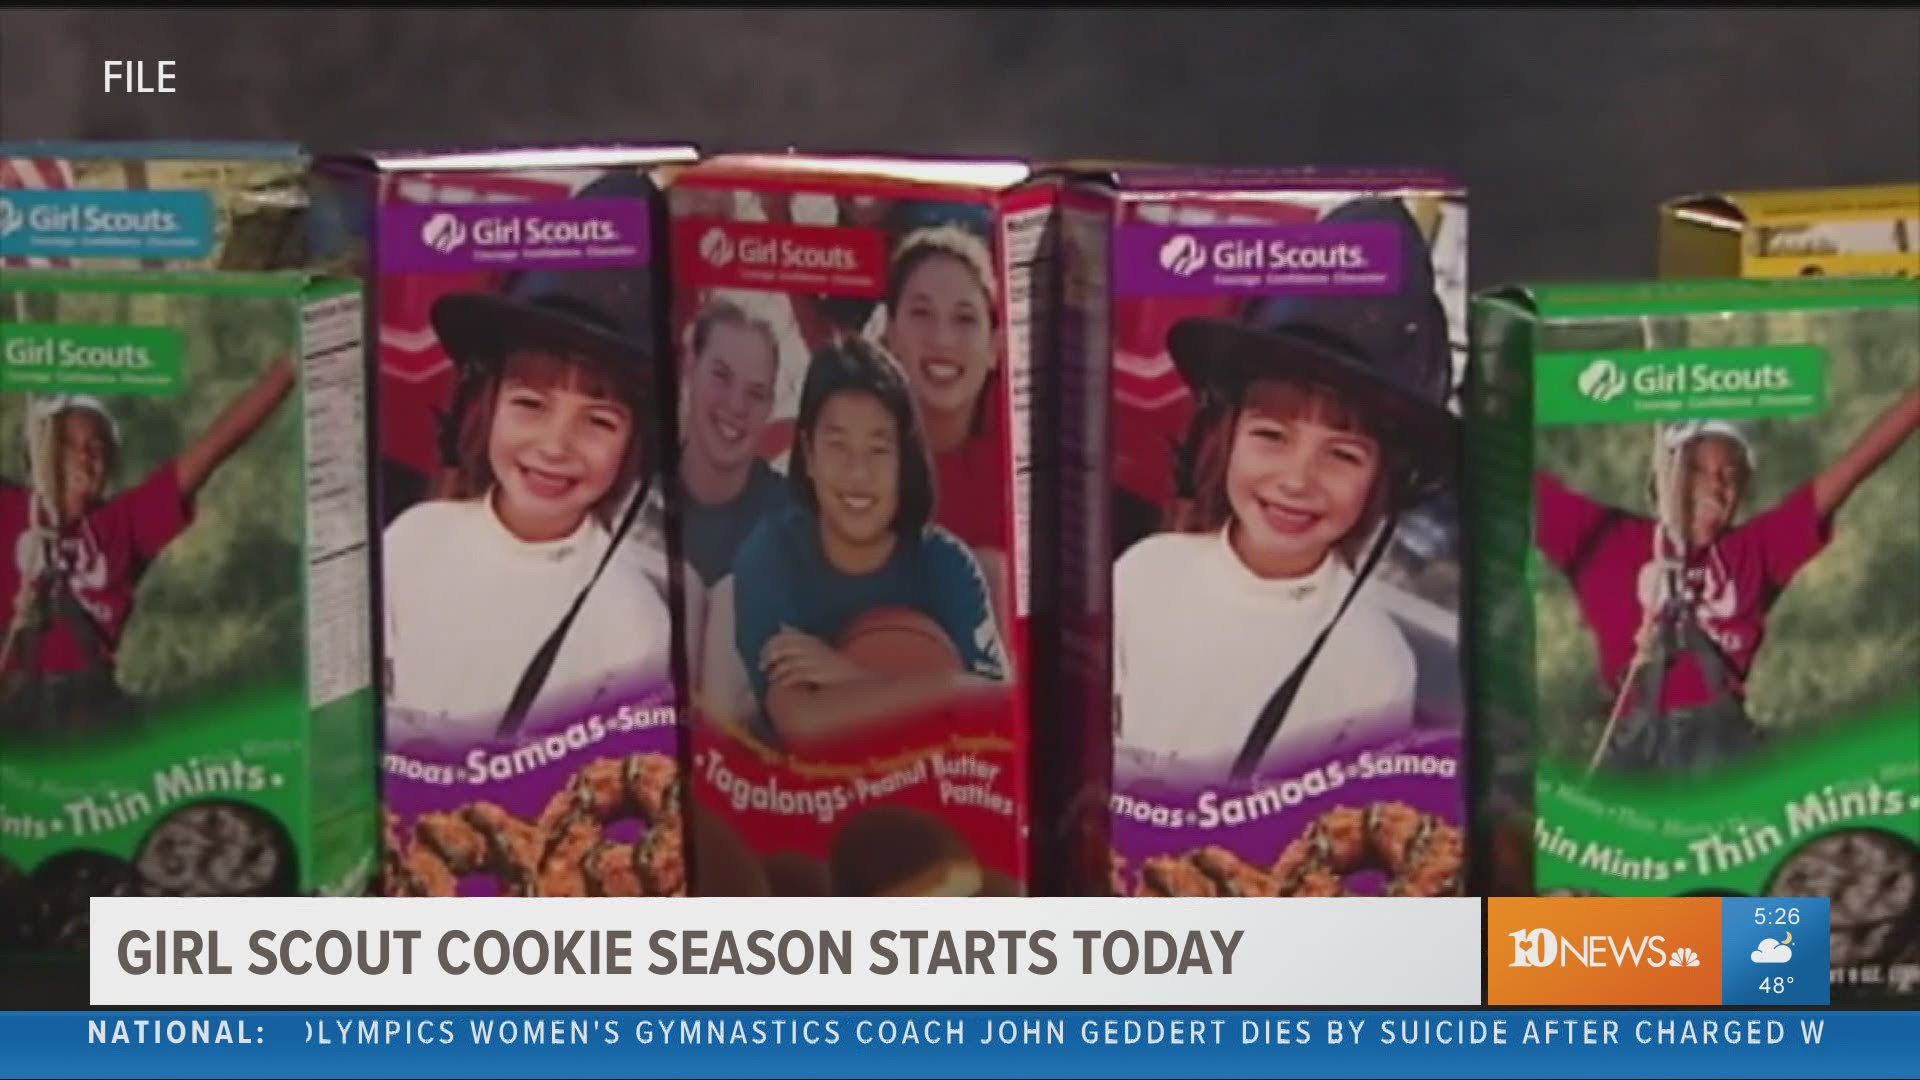 Grab your stretchy pants! Starting Friday, girl scout cookie season begins. There will be cookie booths at businesses across the area.